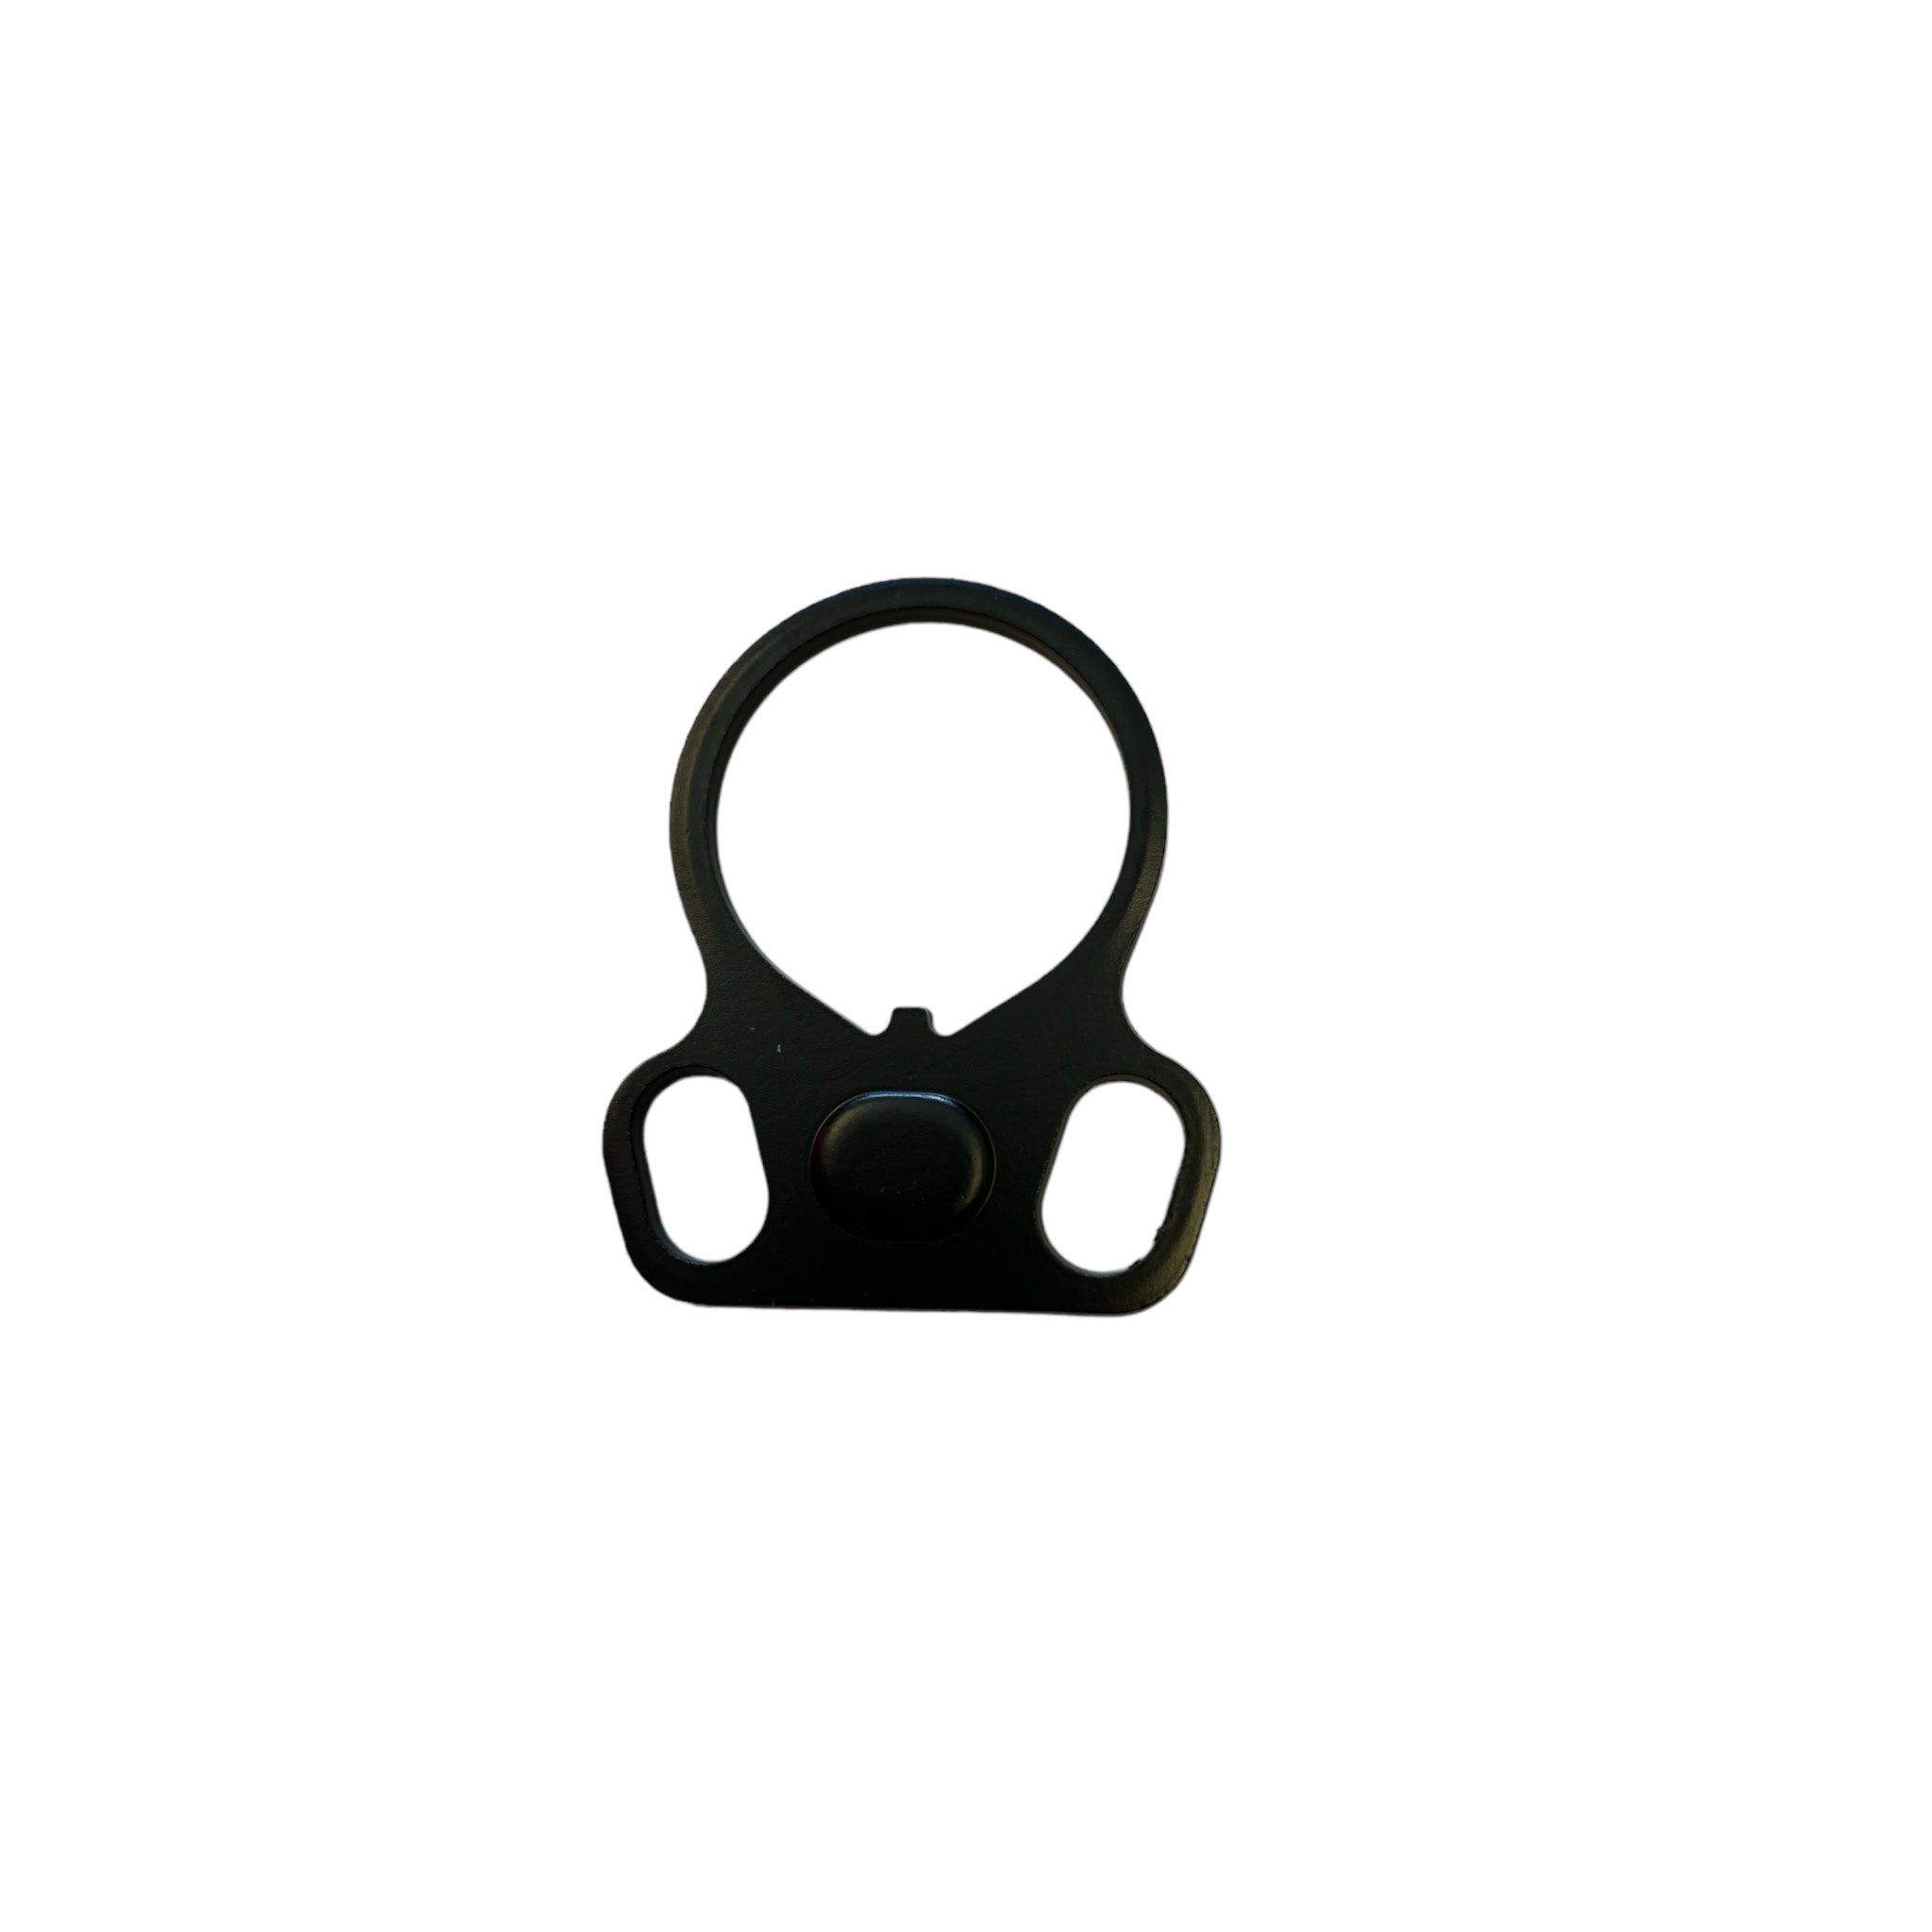 Two Point Sling Mounts, Durable Heavy-Duty Sling Attachment Ring for Airsoft Riffle